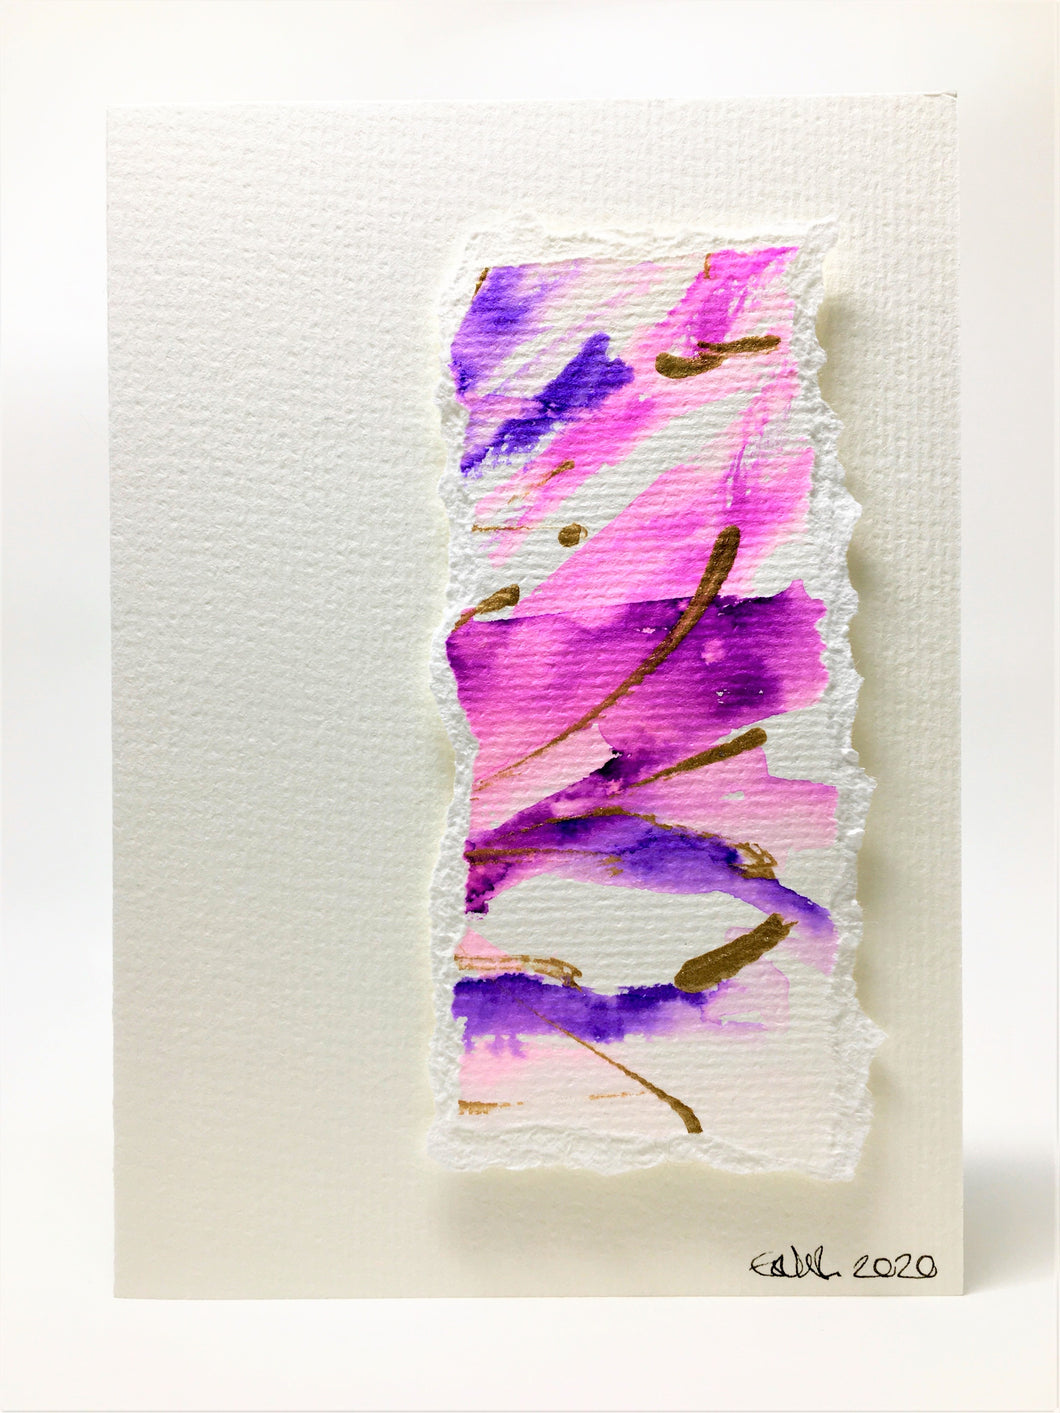 Original Hand Painted Greeting Card - Abstract Purple, Pink and Gold Raised Design #2 - eDgE dEsiGn London